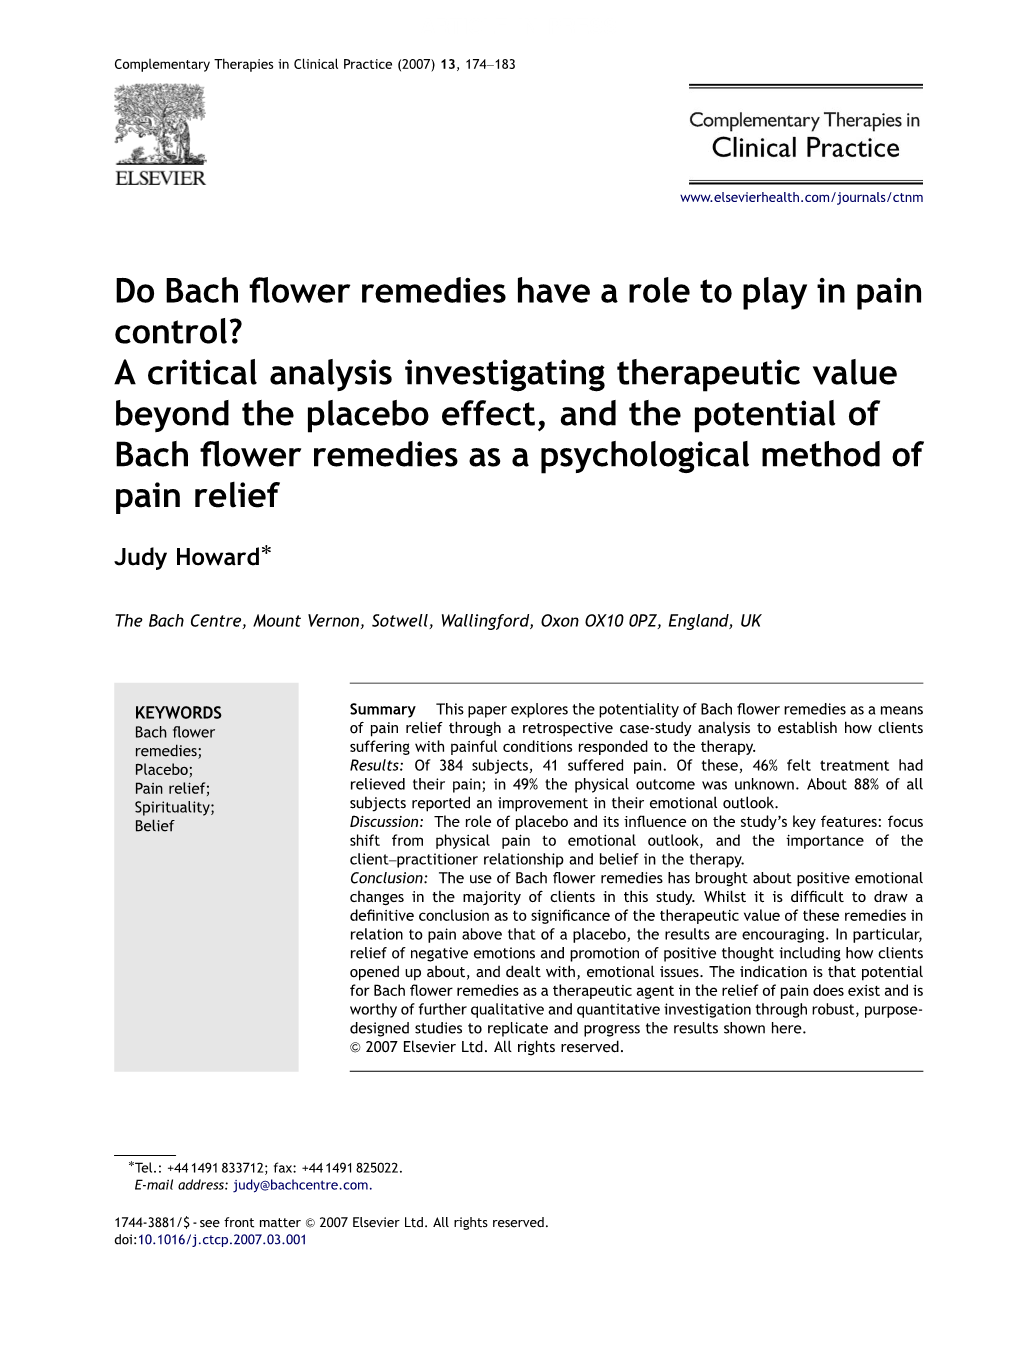 Do Bach Flower Remedies Have a Role to Play in Pain Control?